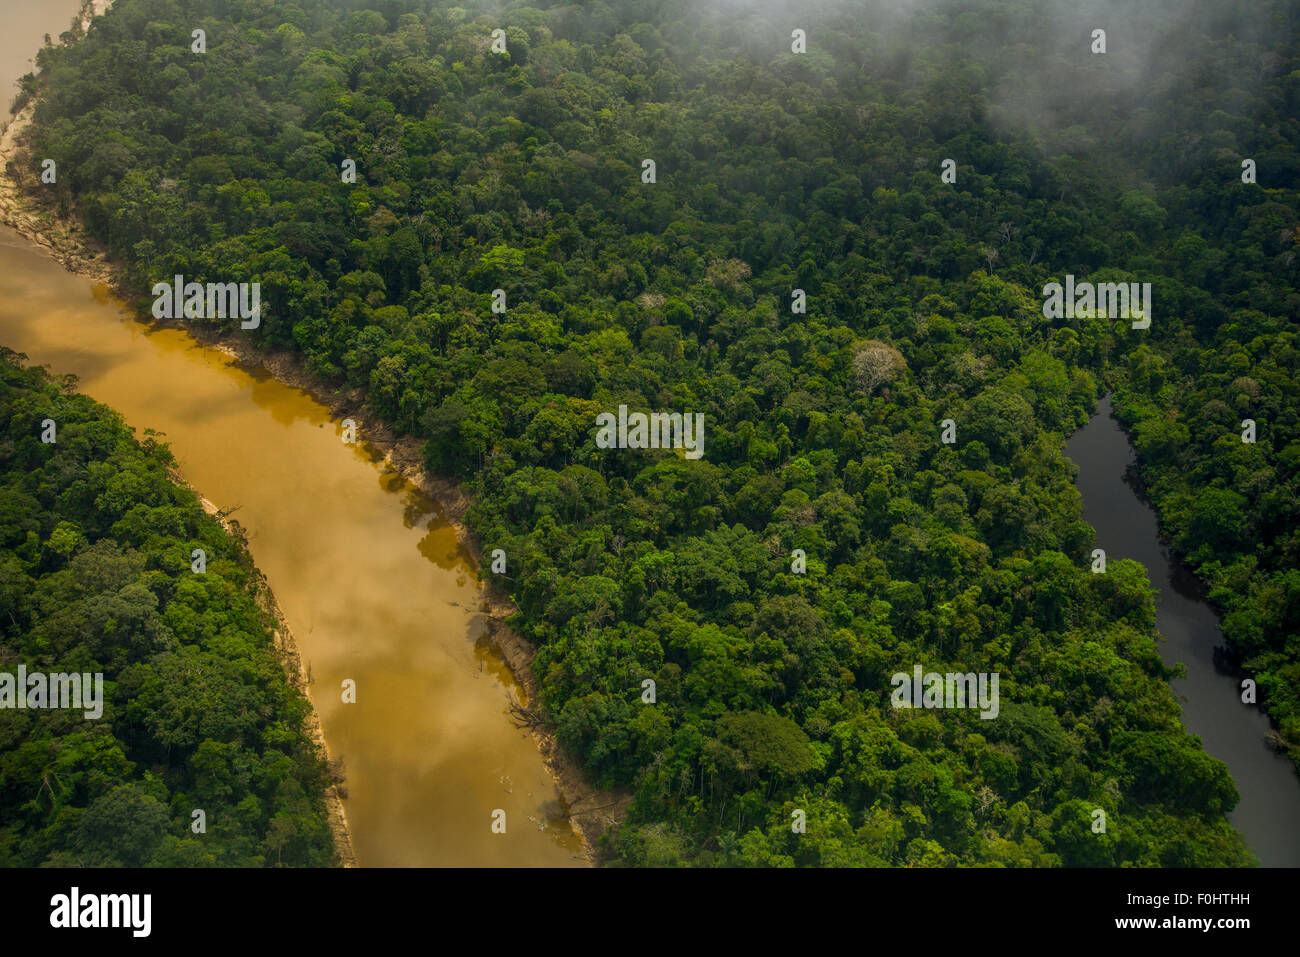 Amazon Rainforest aerial. Primary forest, Yavari Miri River and oxbow lake, between Iquitos, Peru and Brazilian border Stock Photo